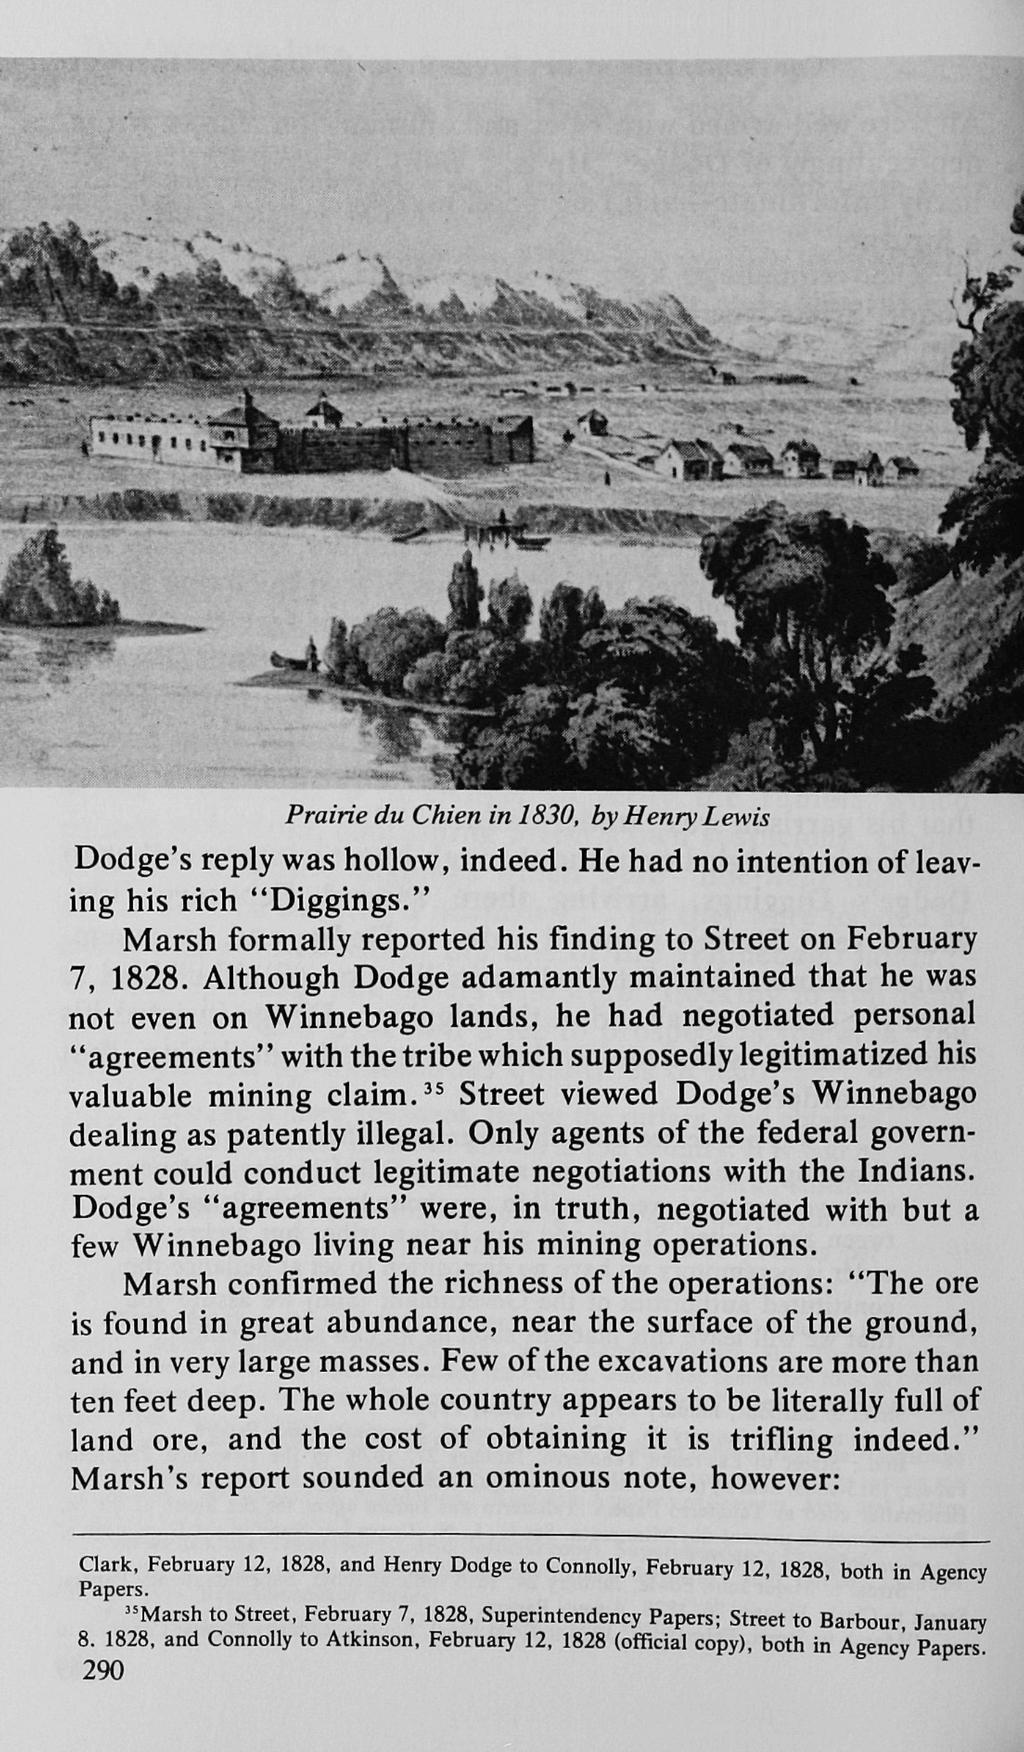 Prairie du Chien in 1830, by Henry Lewis Dodge's reply was hollow, indeed. He had no intention of leaving his rich "Diggings." Marsh formally reported his finding to Street on February 7, 1828.